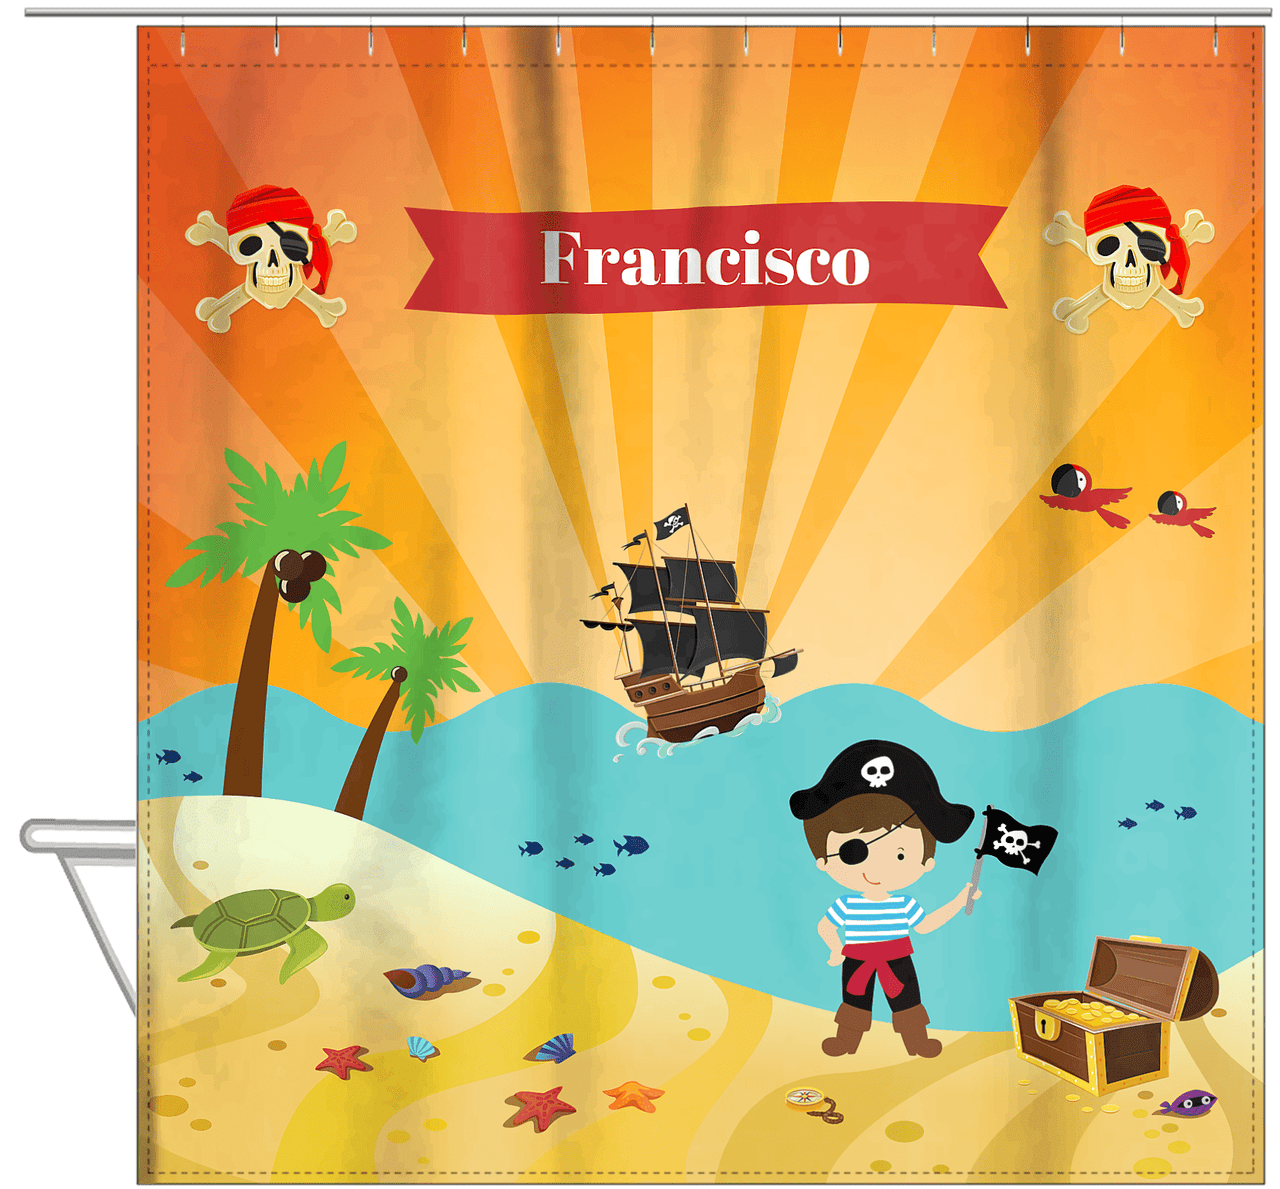 Personalized Pirate Shower Curtain XIII - Orange Background - Brown Hair Boy with Flag - Hanging View